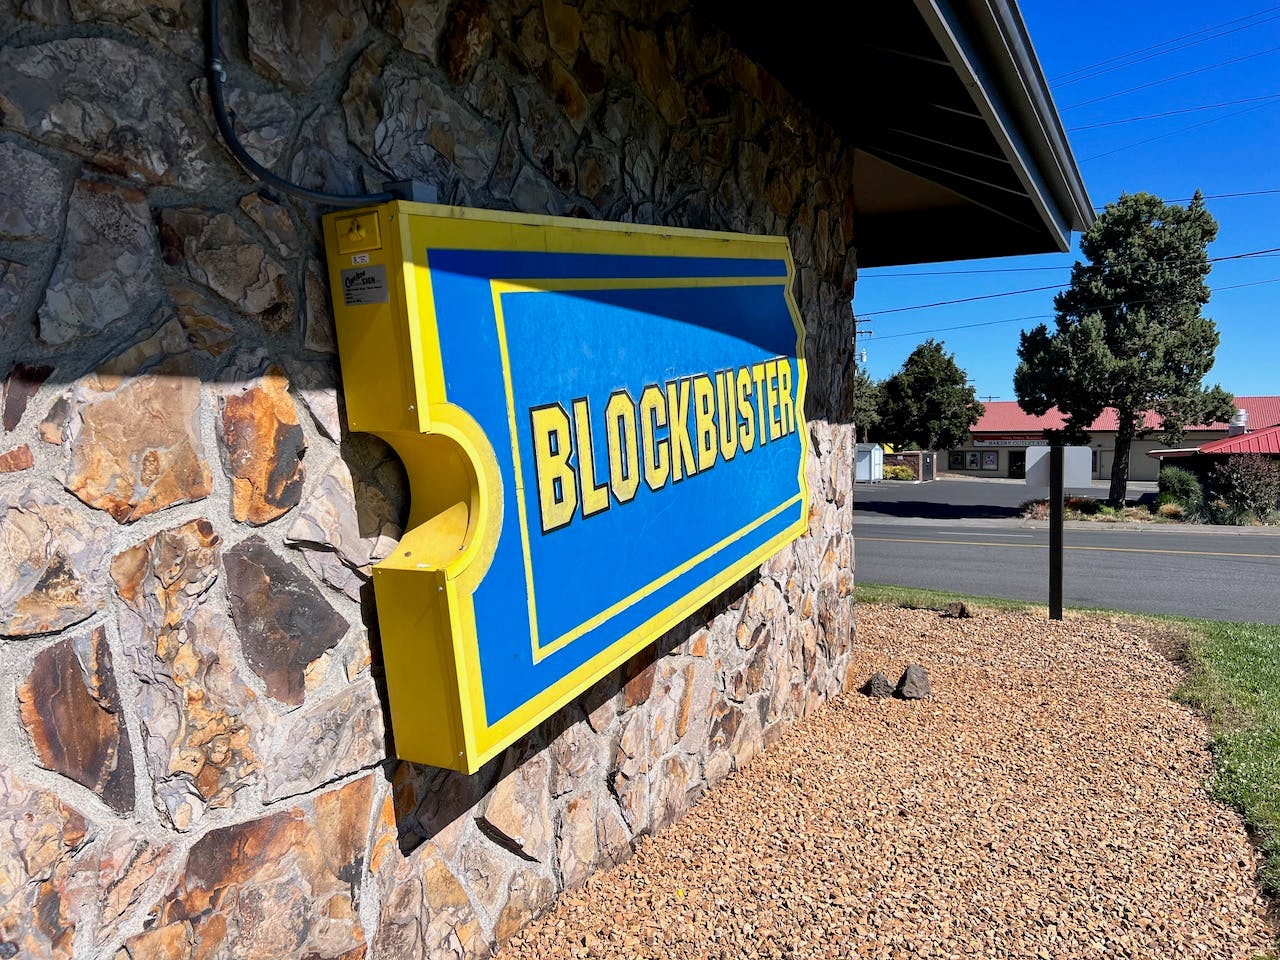 I took this picture in Bend, Oregon on July 2, 2023. It’s the last remaining Blockbuster Video store. Perhaps it’s proof that we don’t all need to adapt to change to survive. But, 8,999 other Blockbuster stores didn’t make it. So…